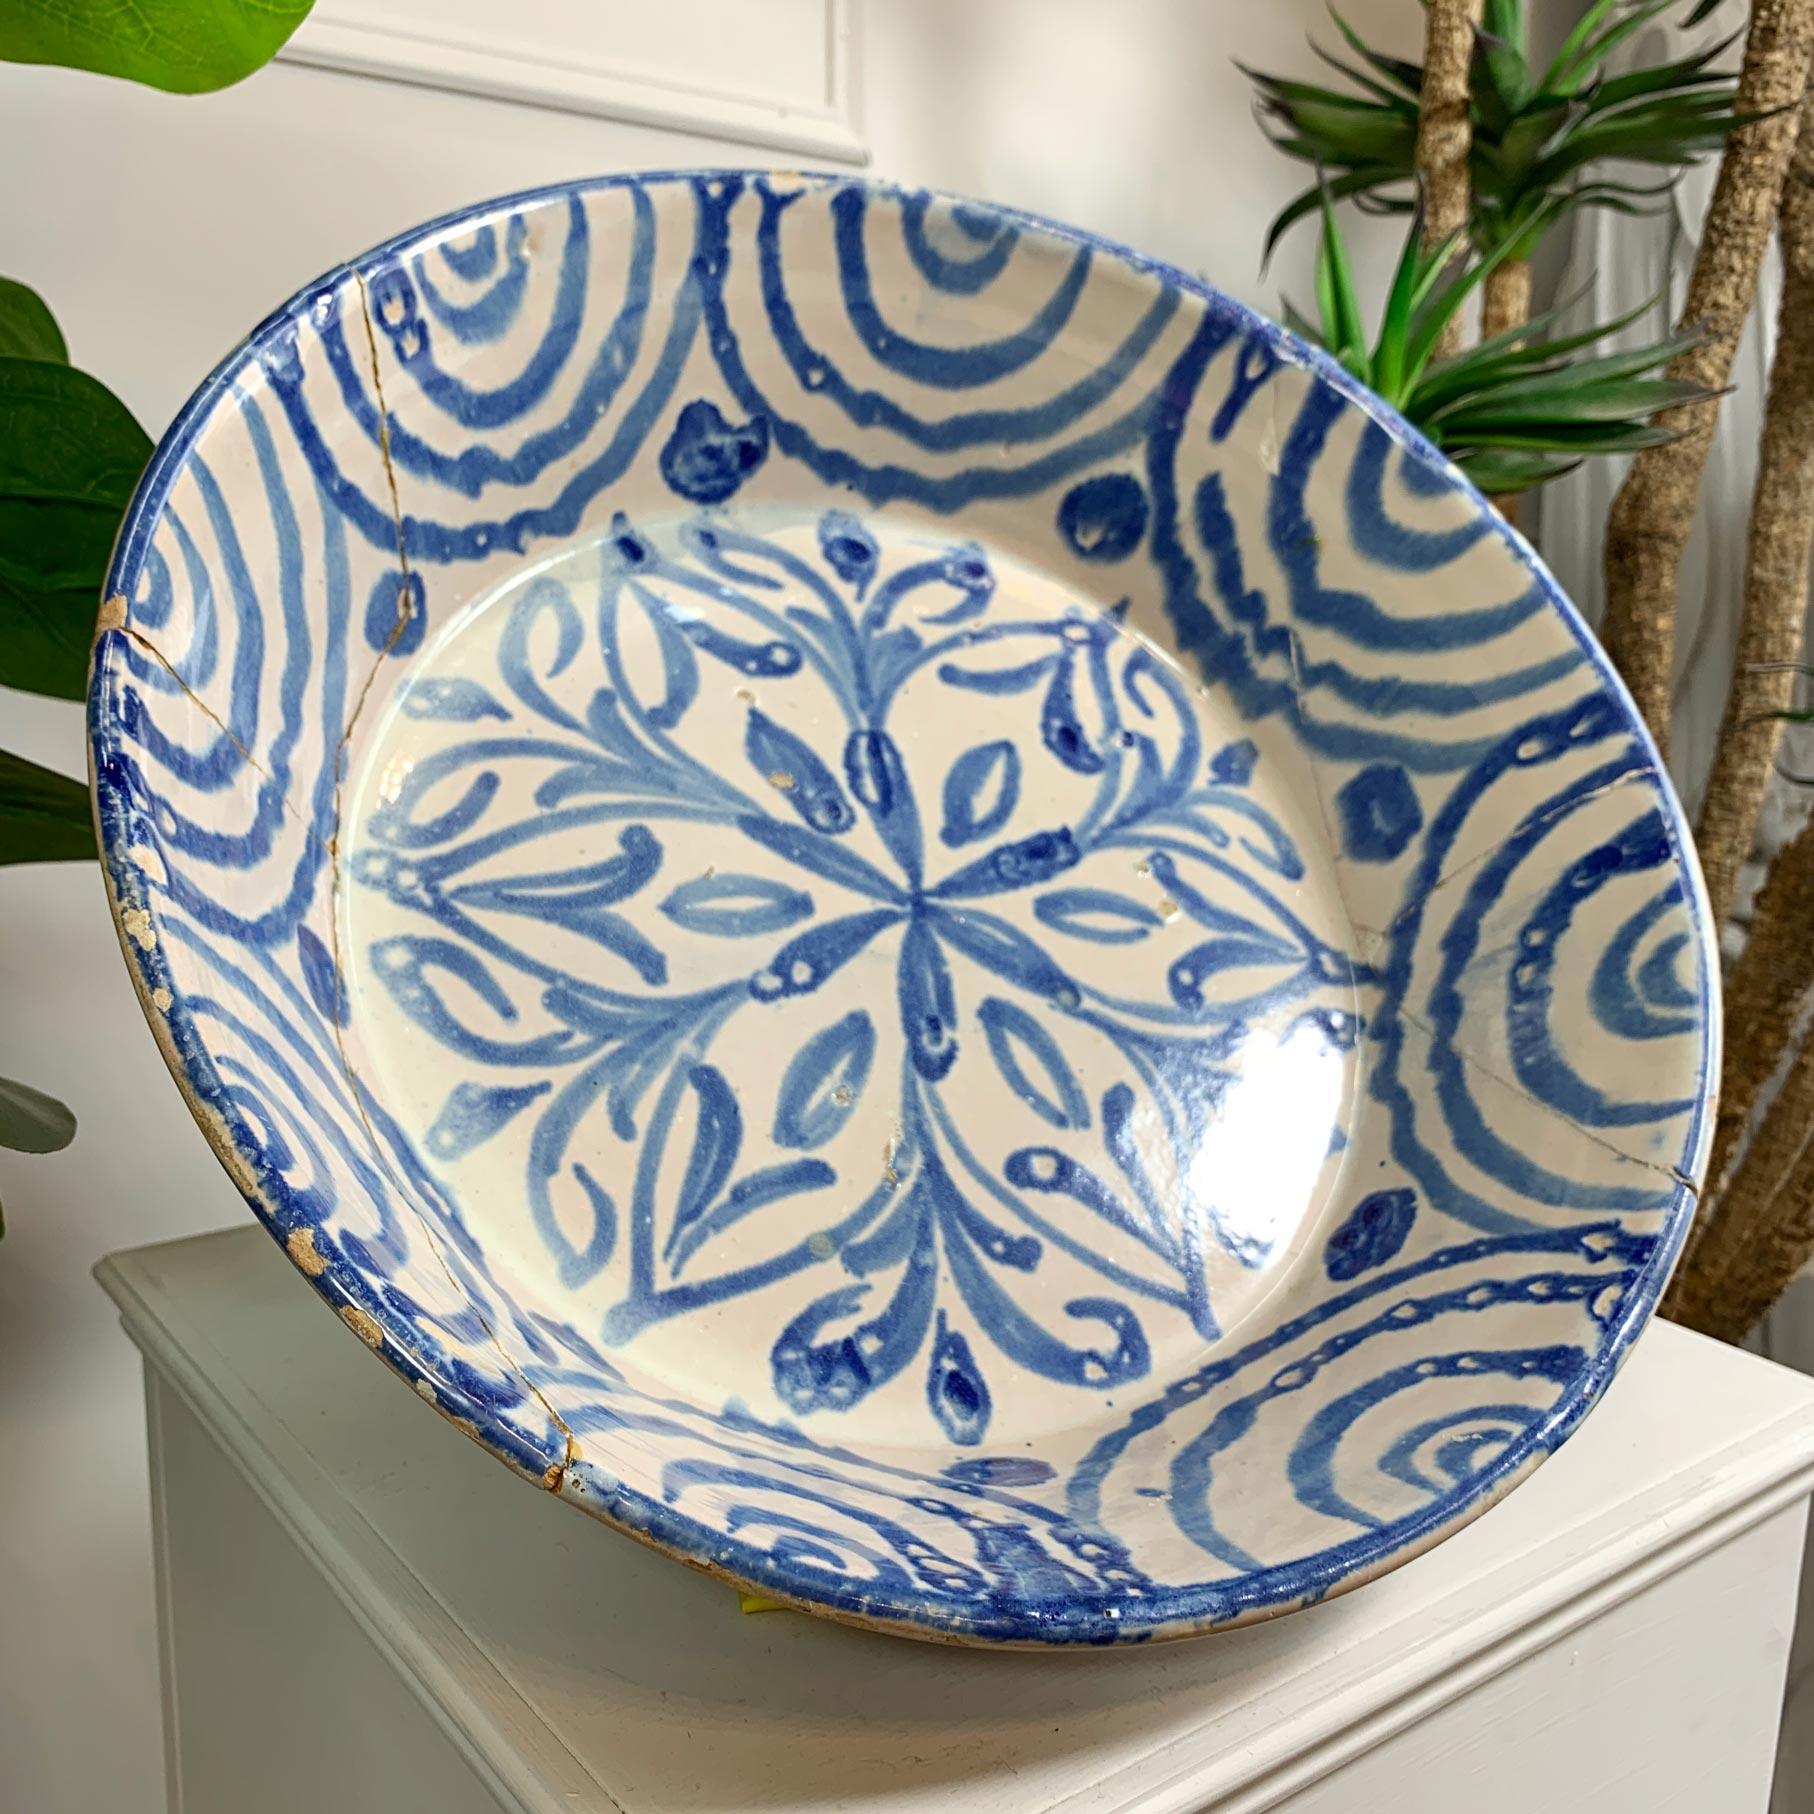 Large 18th C Blue and White Spanish Lebrillo Bowl For Sale 6